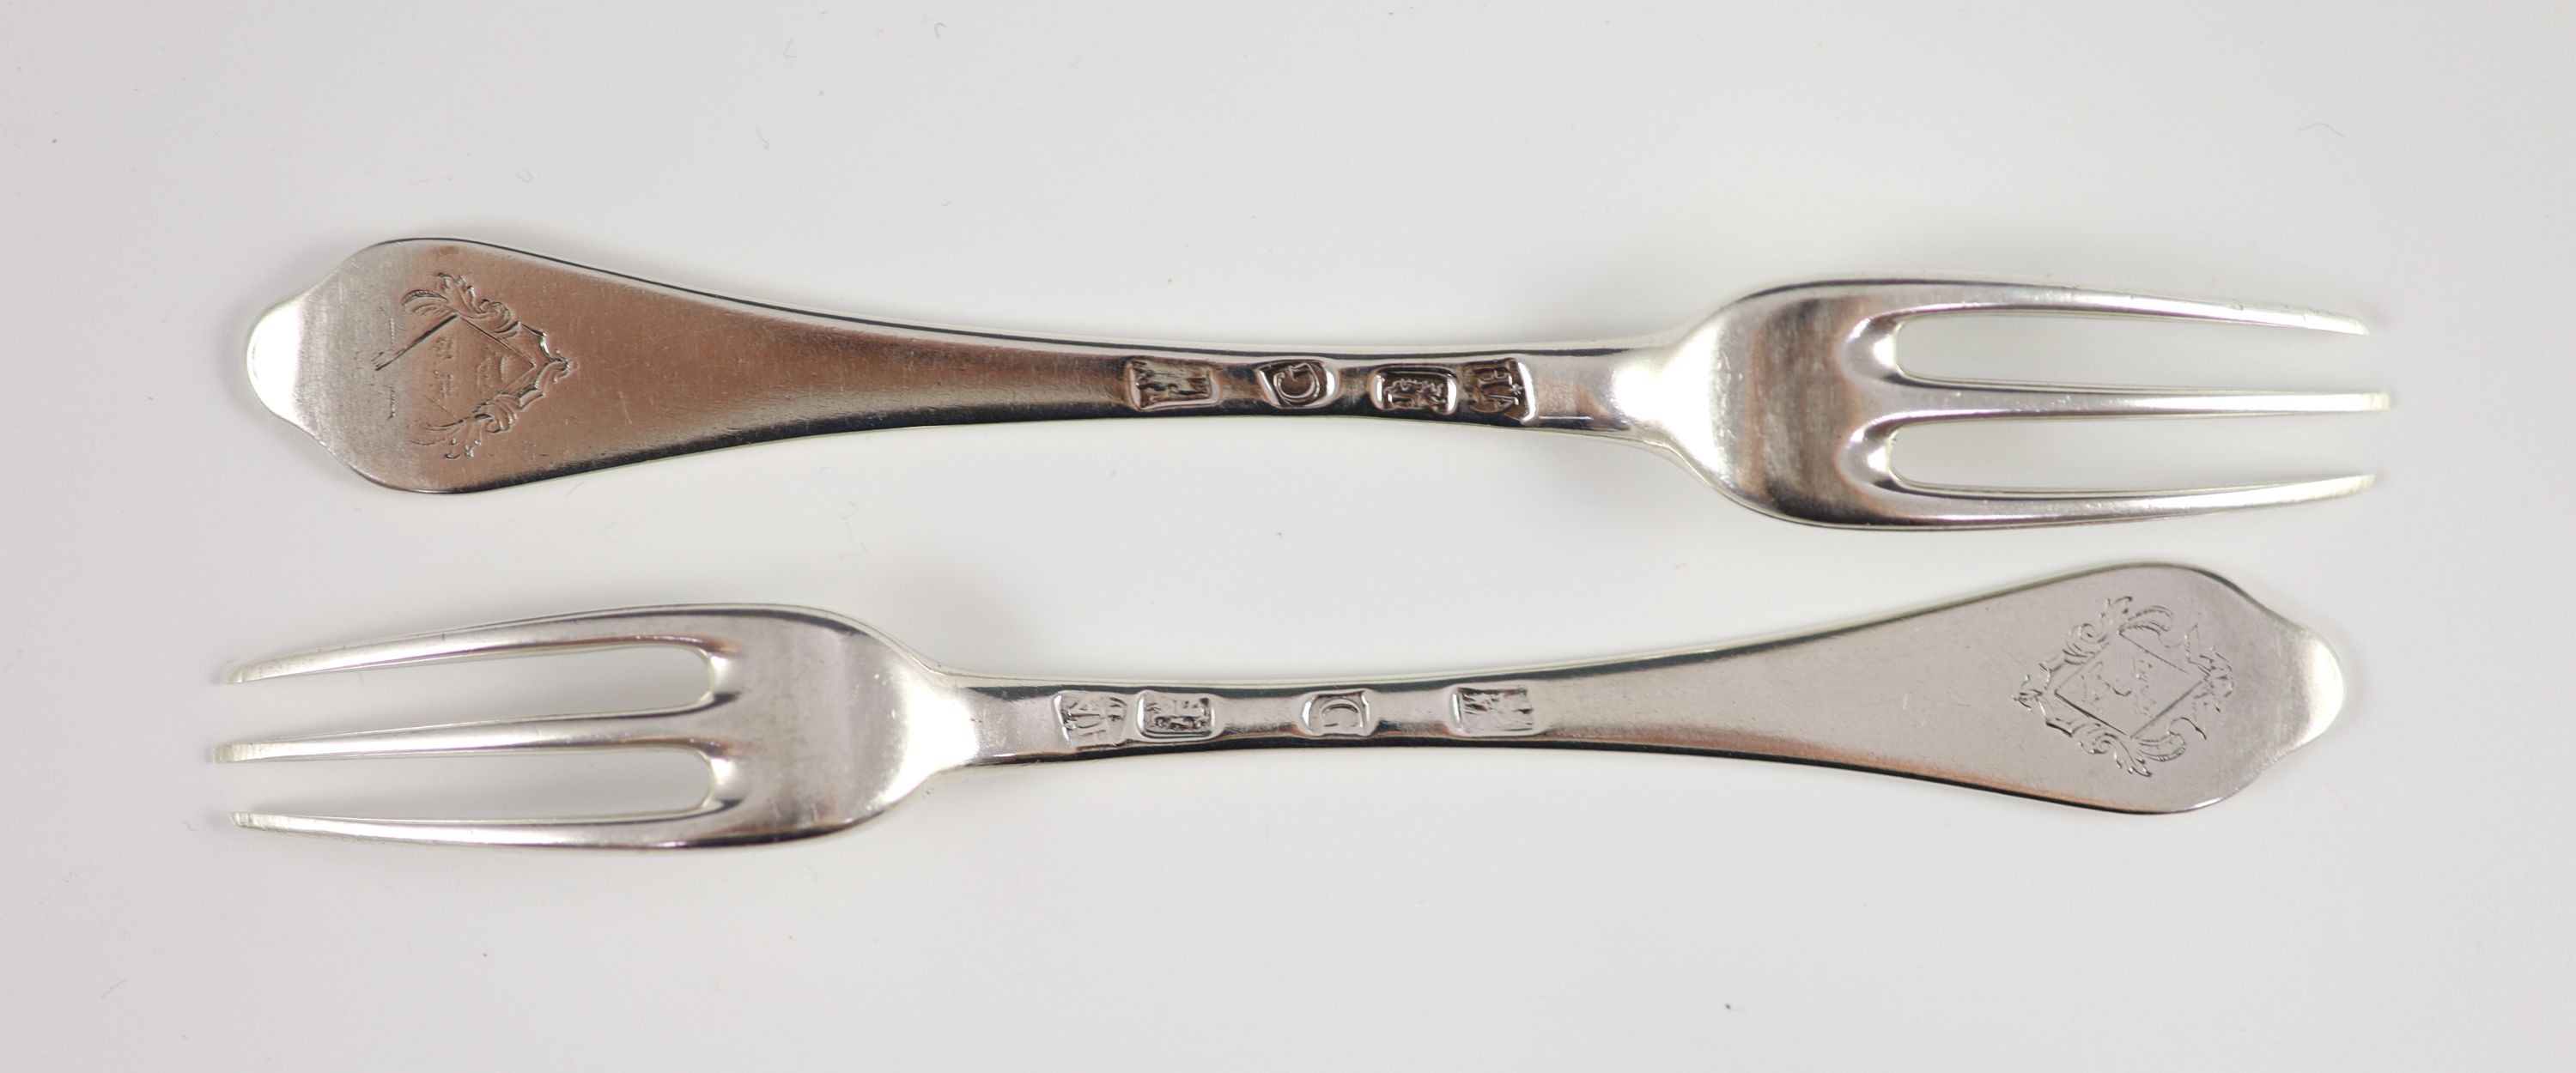 A pair of George I silver three-prong forks, with dog nose terminals, engraved with armorials, London 1722 by Paul Hanet, each 18 cm long, 4oz.